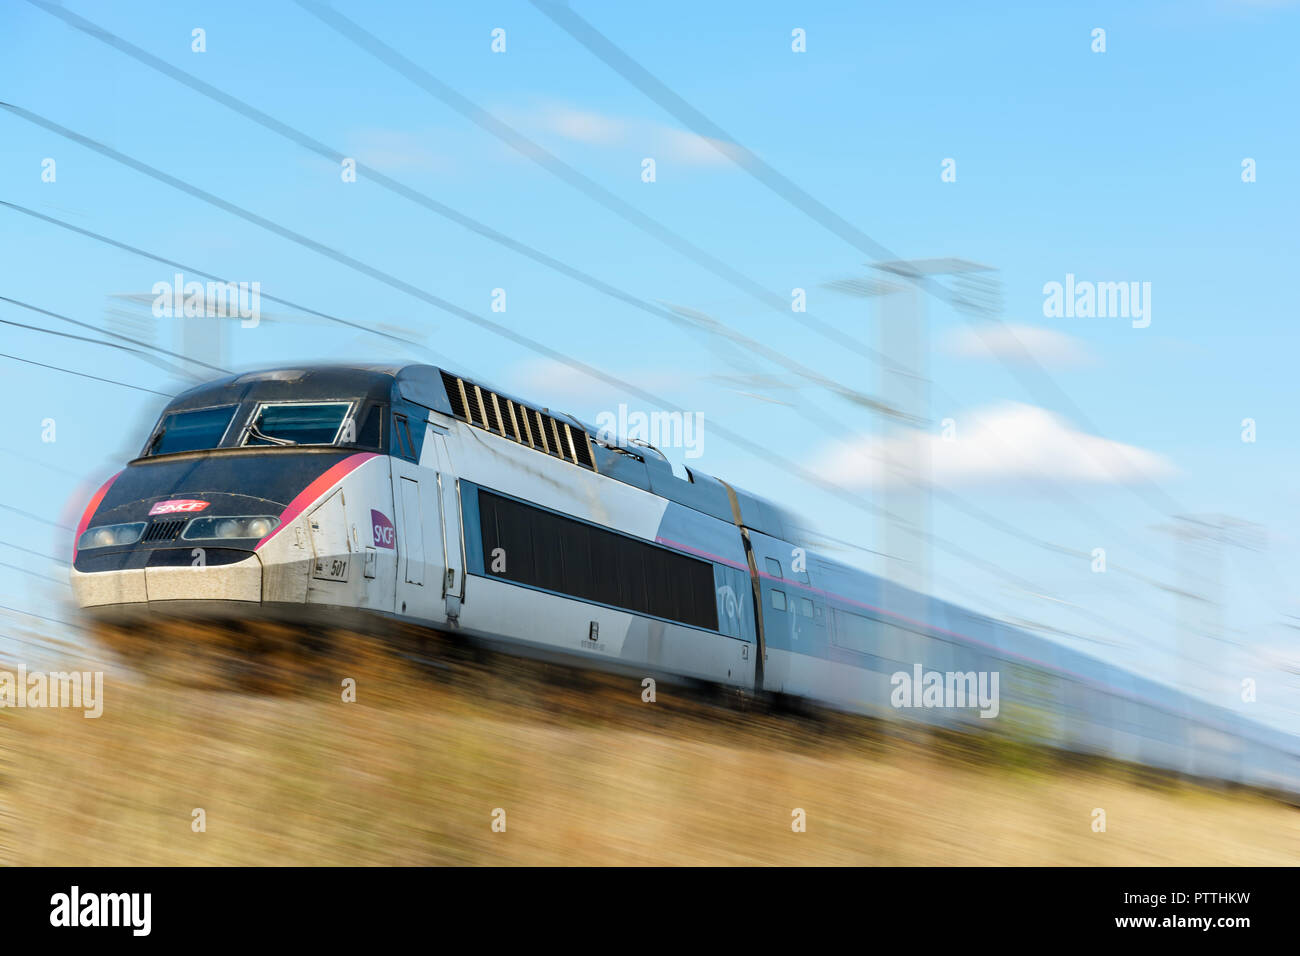 A TGV high-speed train in Carmillon livery from french company SNCF driving at full speed on the East European high-speed railway (with motion blur). Stock Photo